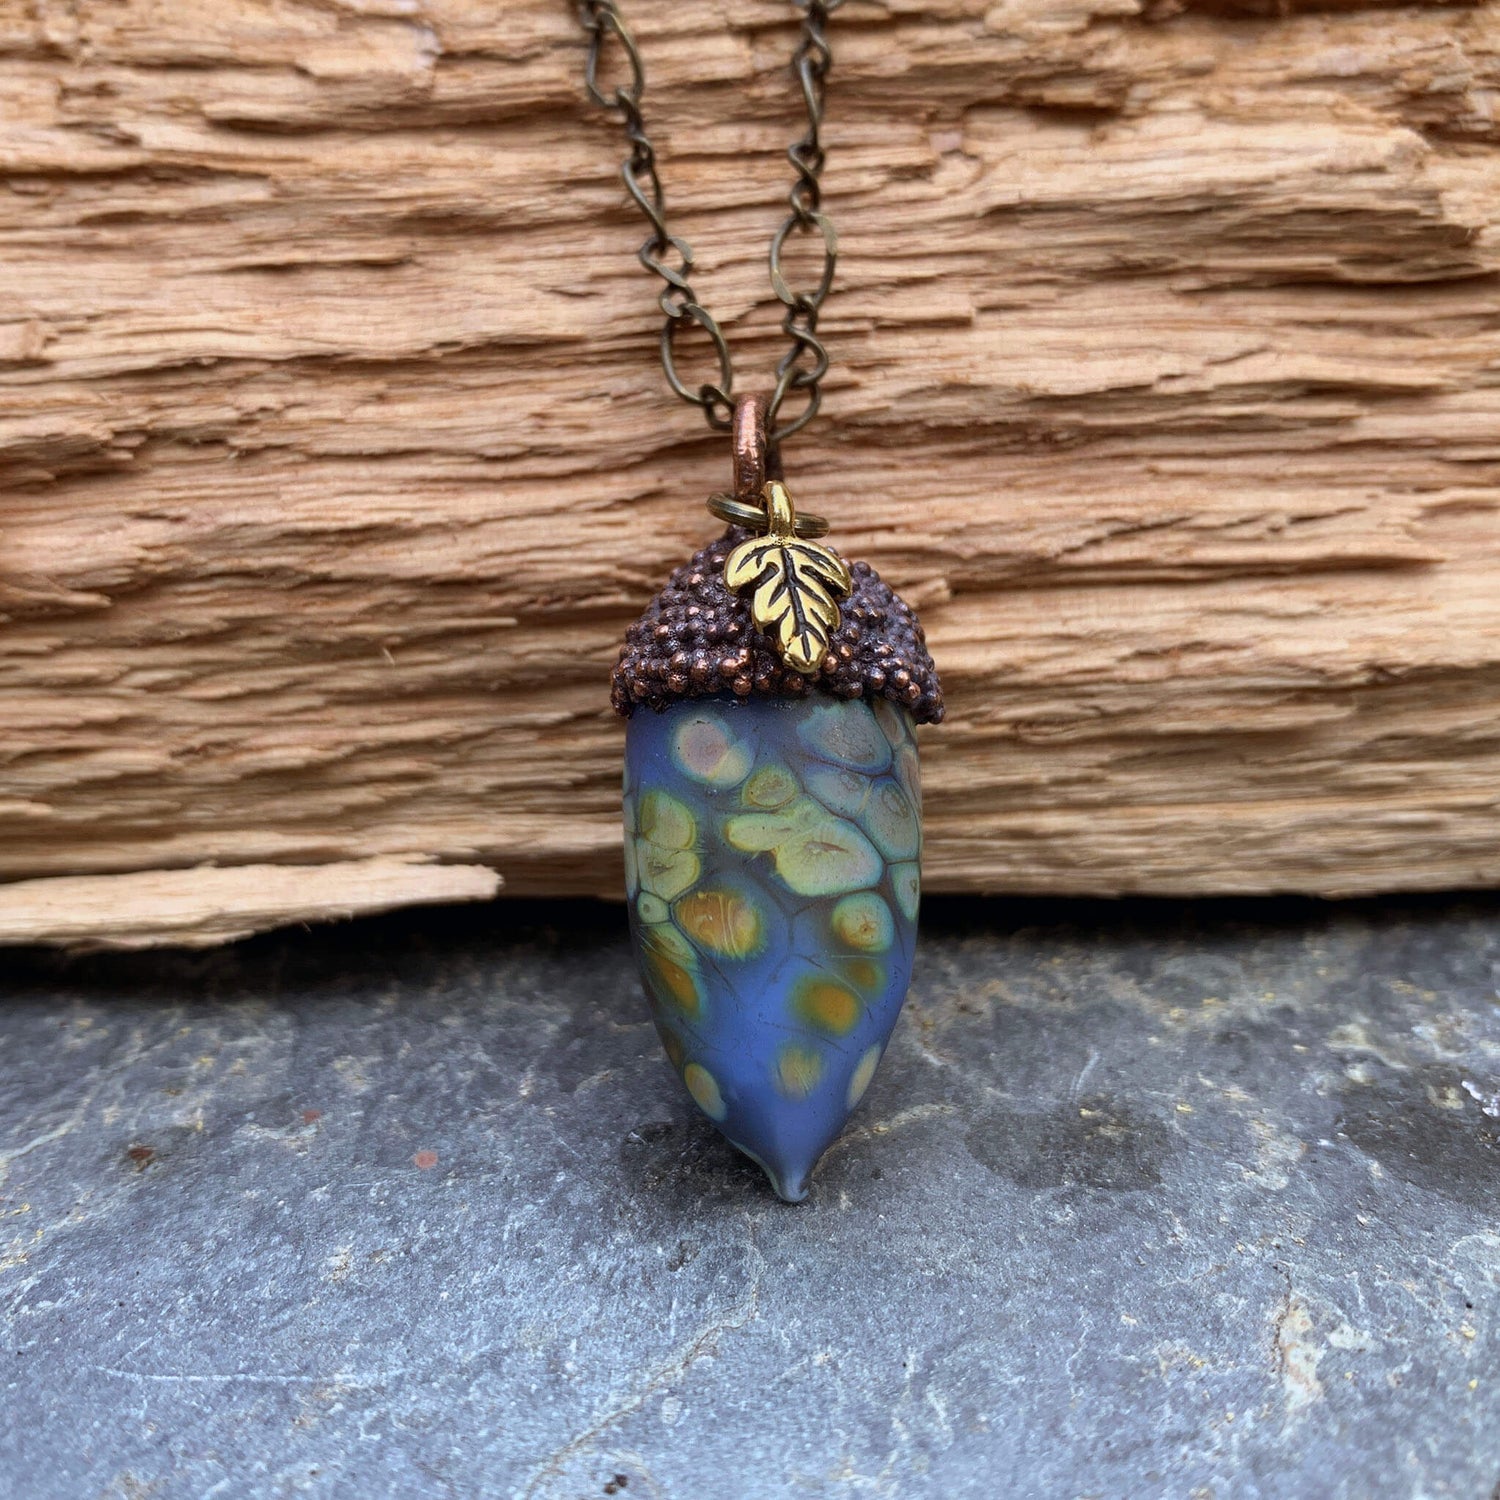 Limited Edition Glass and Copper Acorn Pendant in Periwinkle, photographed against wood on a stone surface.